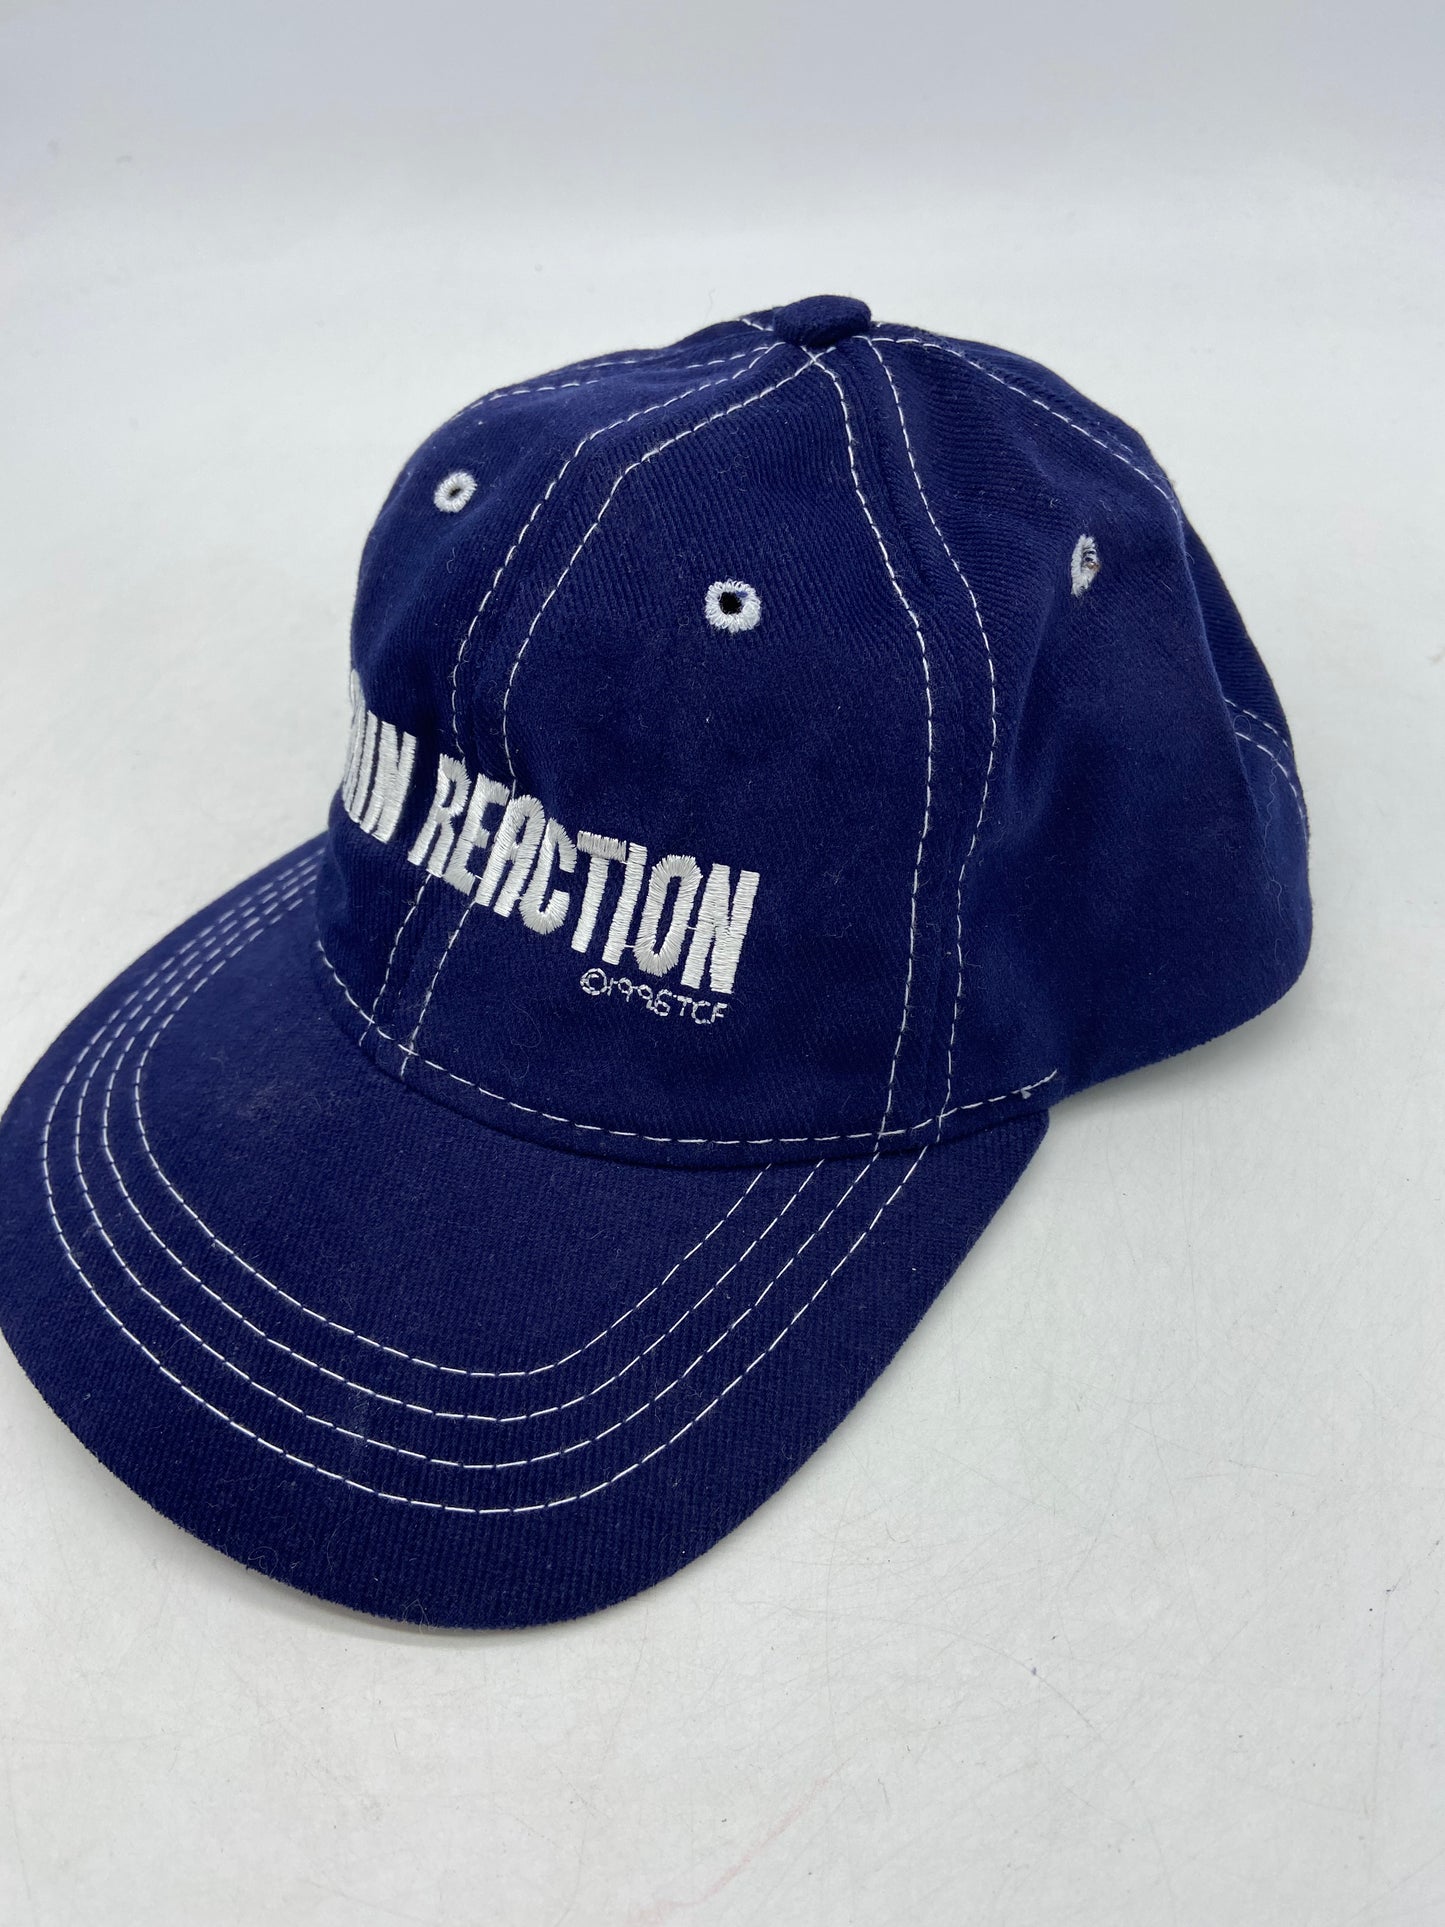 Load image into Gallery viewer, VTG 1996 Chain Reaction Keanu Reeves Snapback Hat
